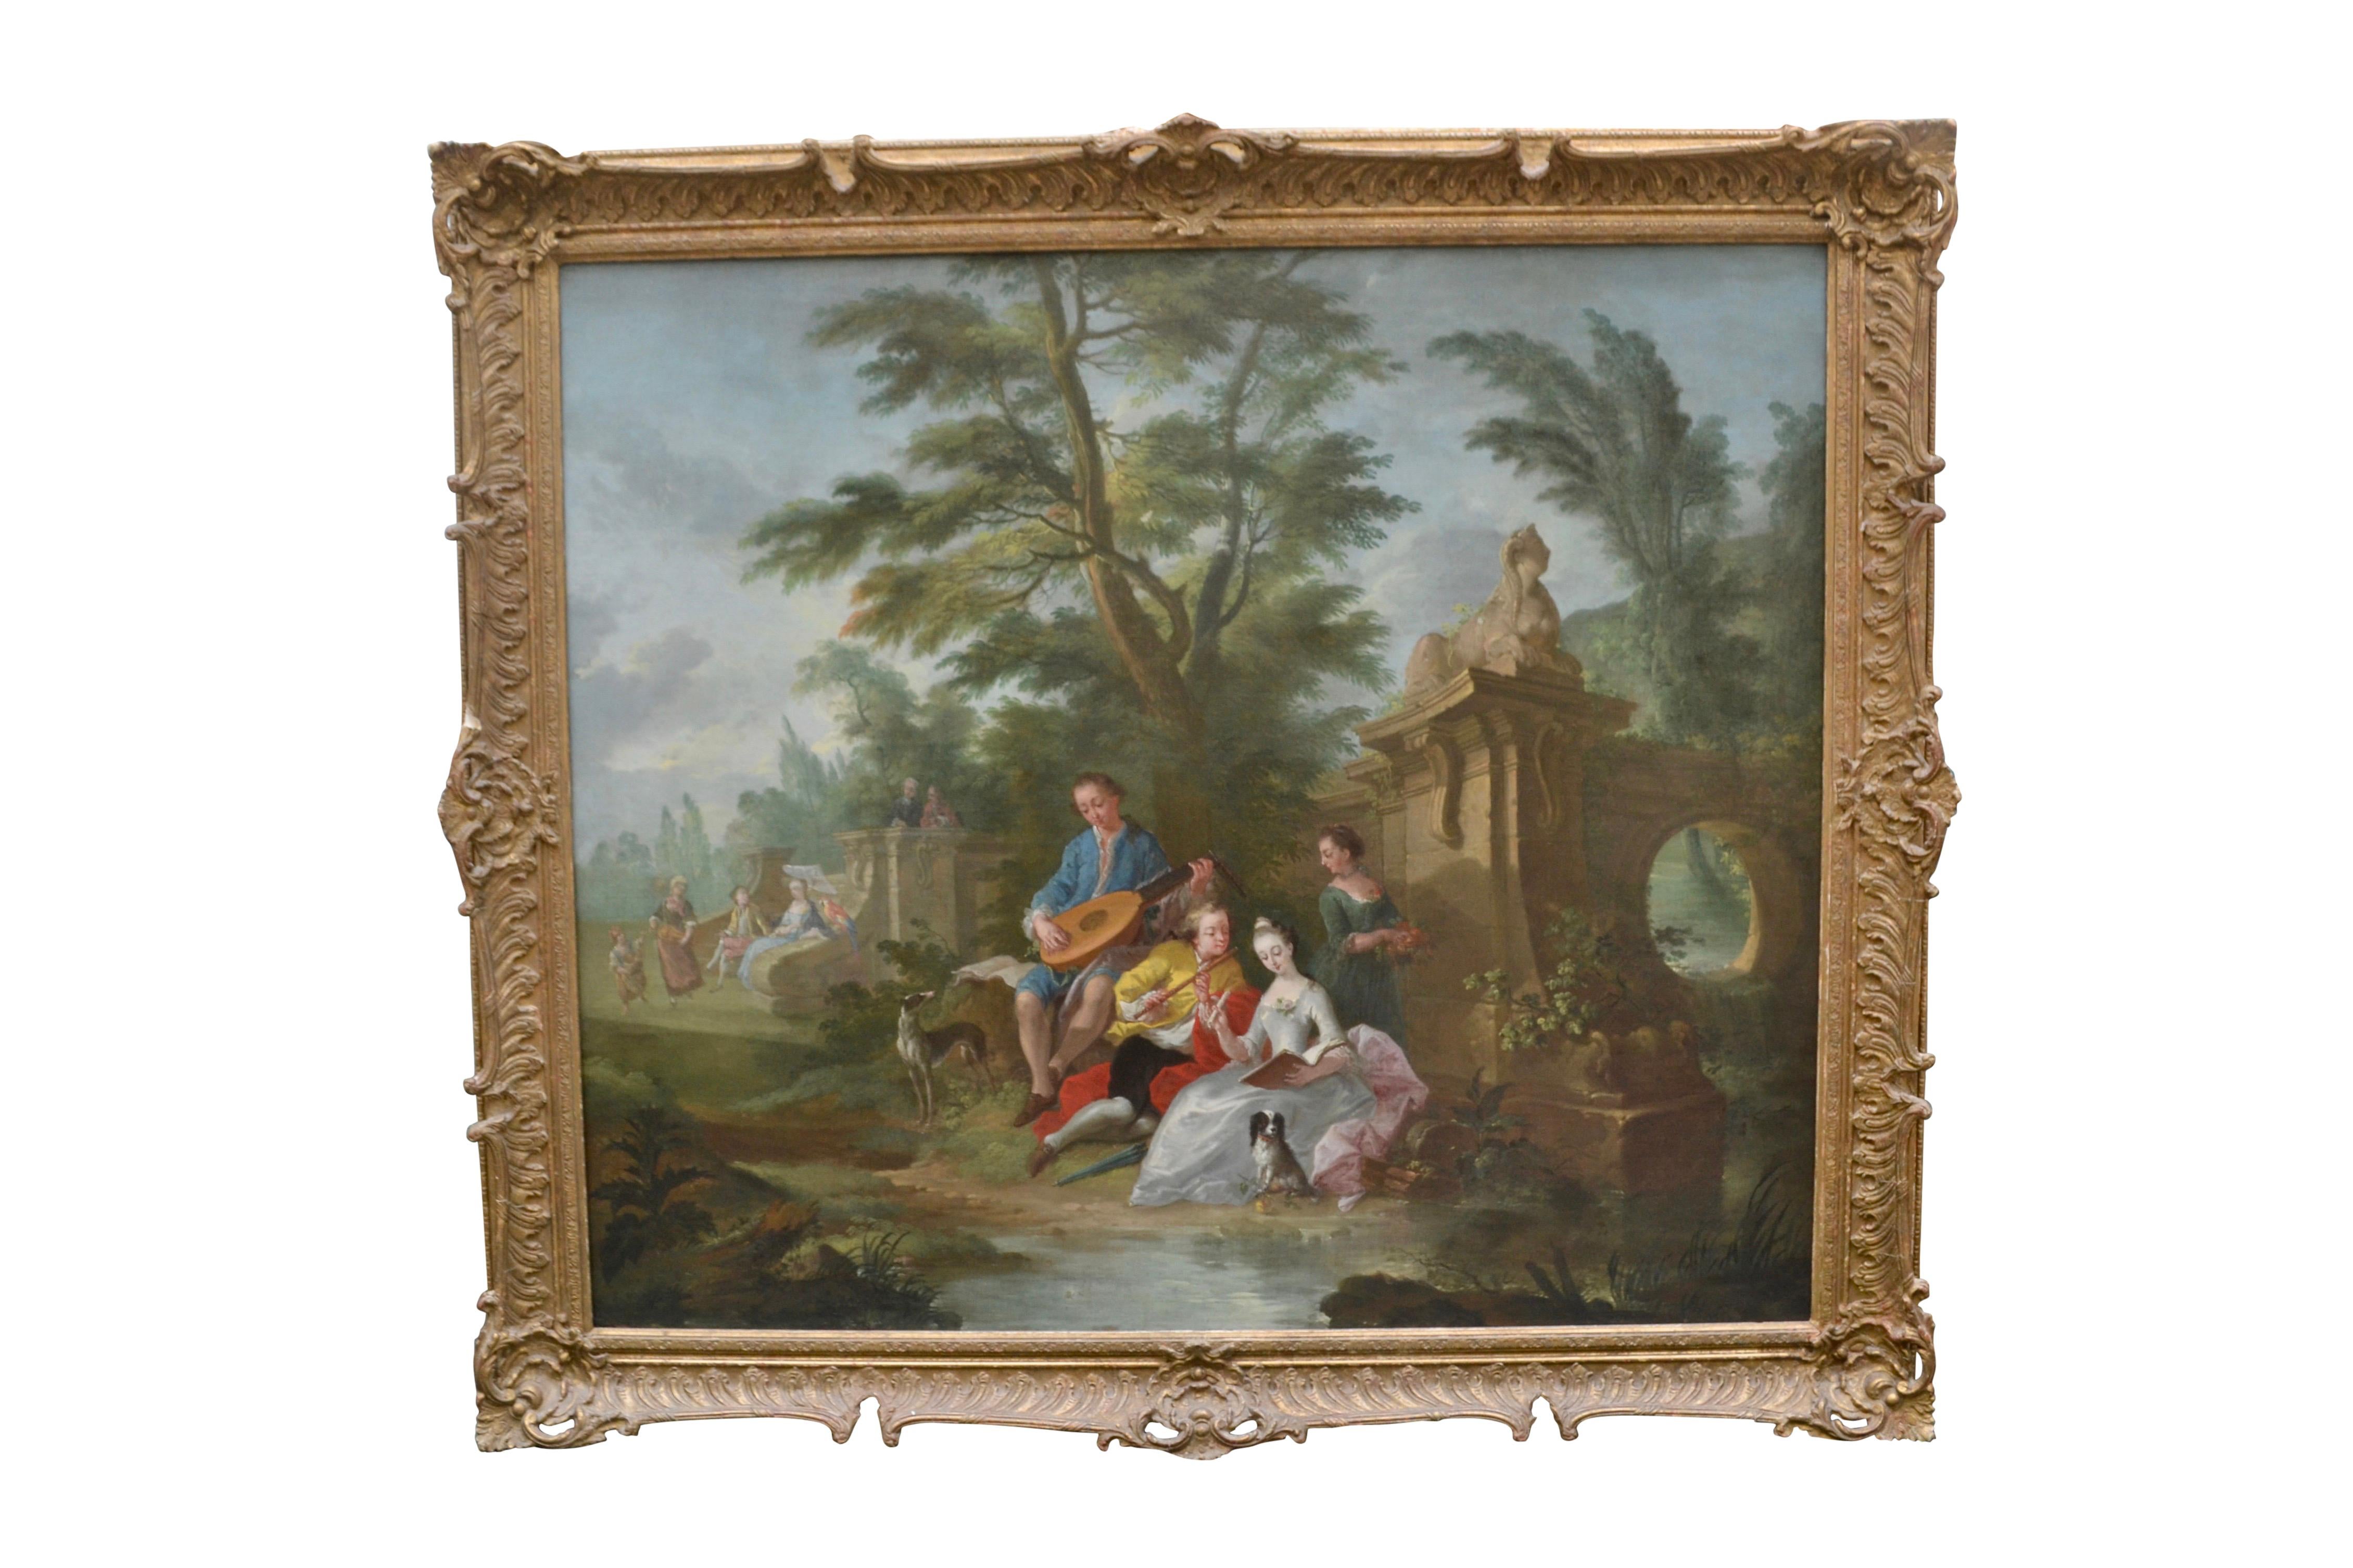 A romantic 18th century oil painting on canvas depicting two young couples in an idyllic landscape, the figures sitting by a stream beside a garden folly, their pets with them. The two men serenade the women with their stringed instruments. The